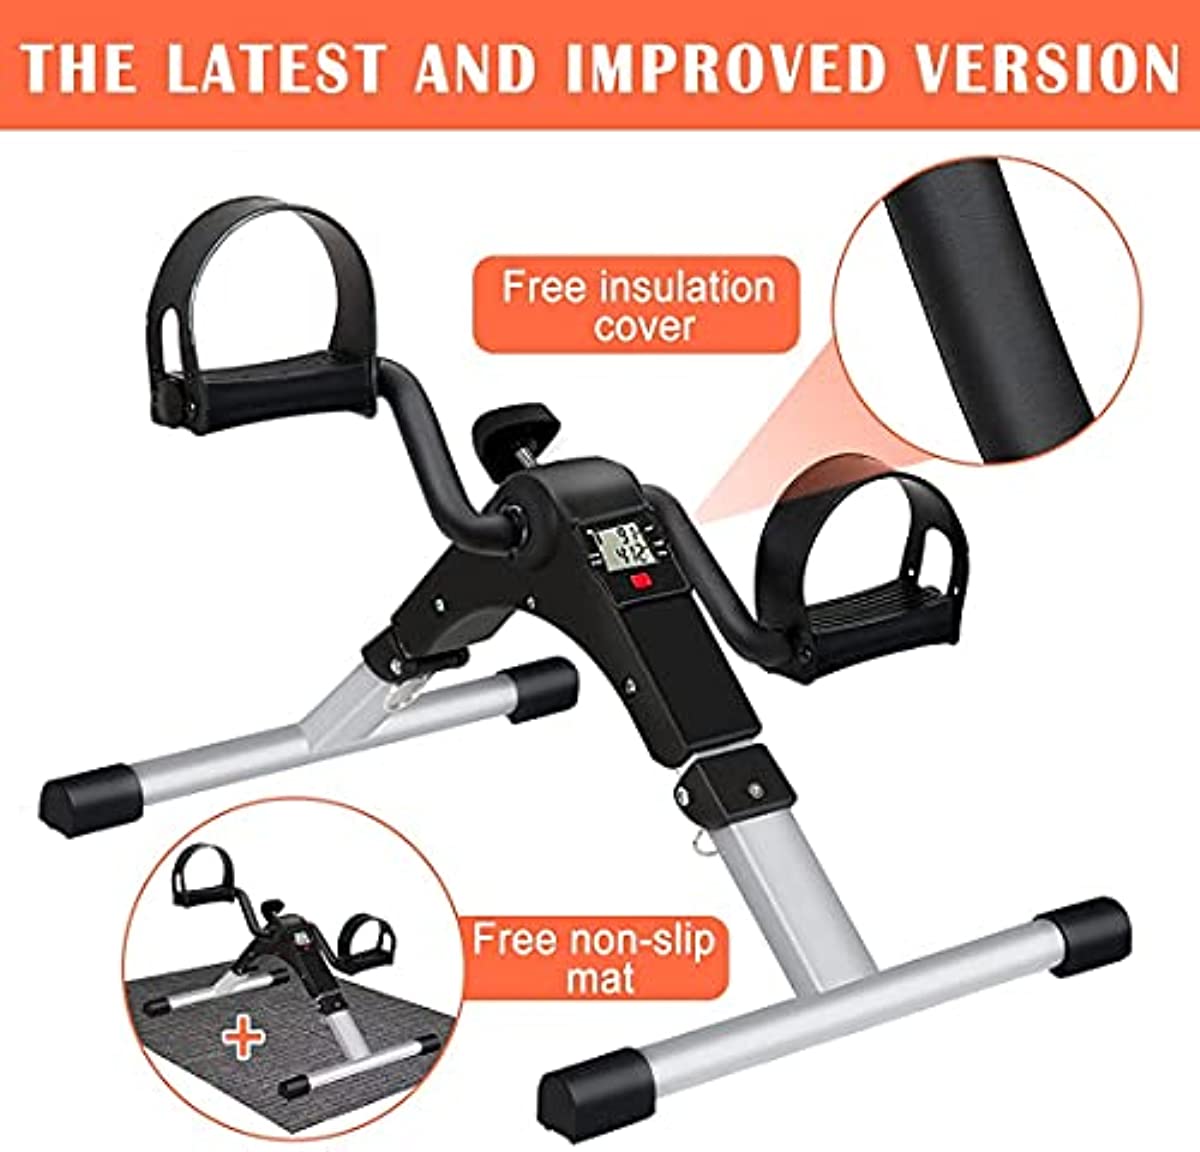 TABEKE Pedal Exerciser, Under Desk Bike Stationary Pedal Exerciser for Arm and Leg Workout, Portable Folding Sitting Desk Cycle